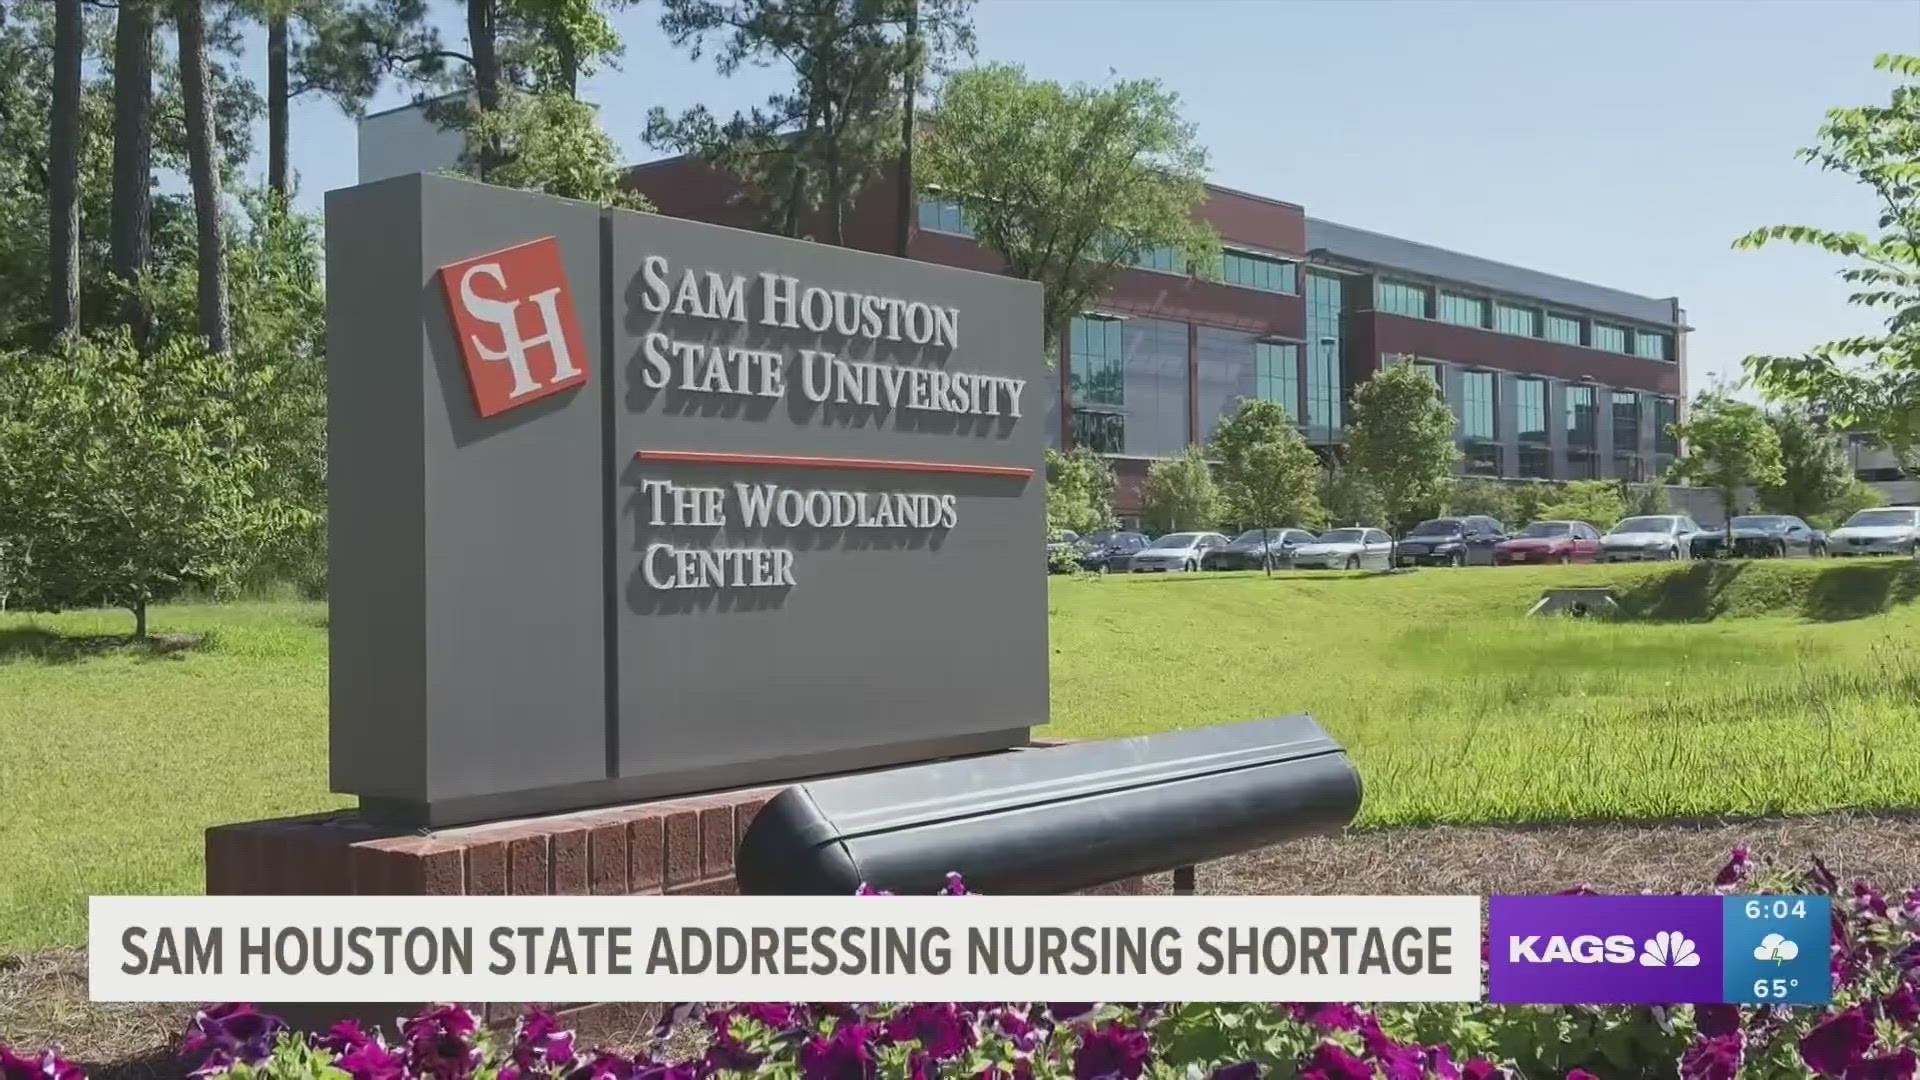 The school's nursing school has received a new grant from the Texas Higher Education Coordinating Board to address nursing shortages in the Lone Star State.